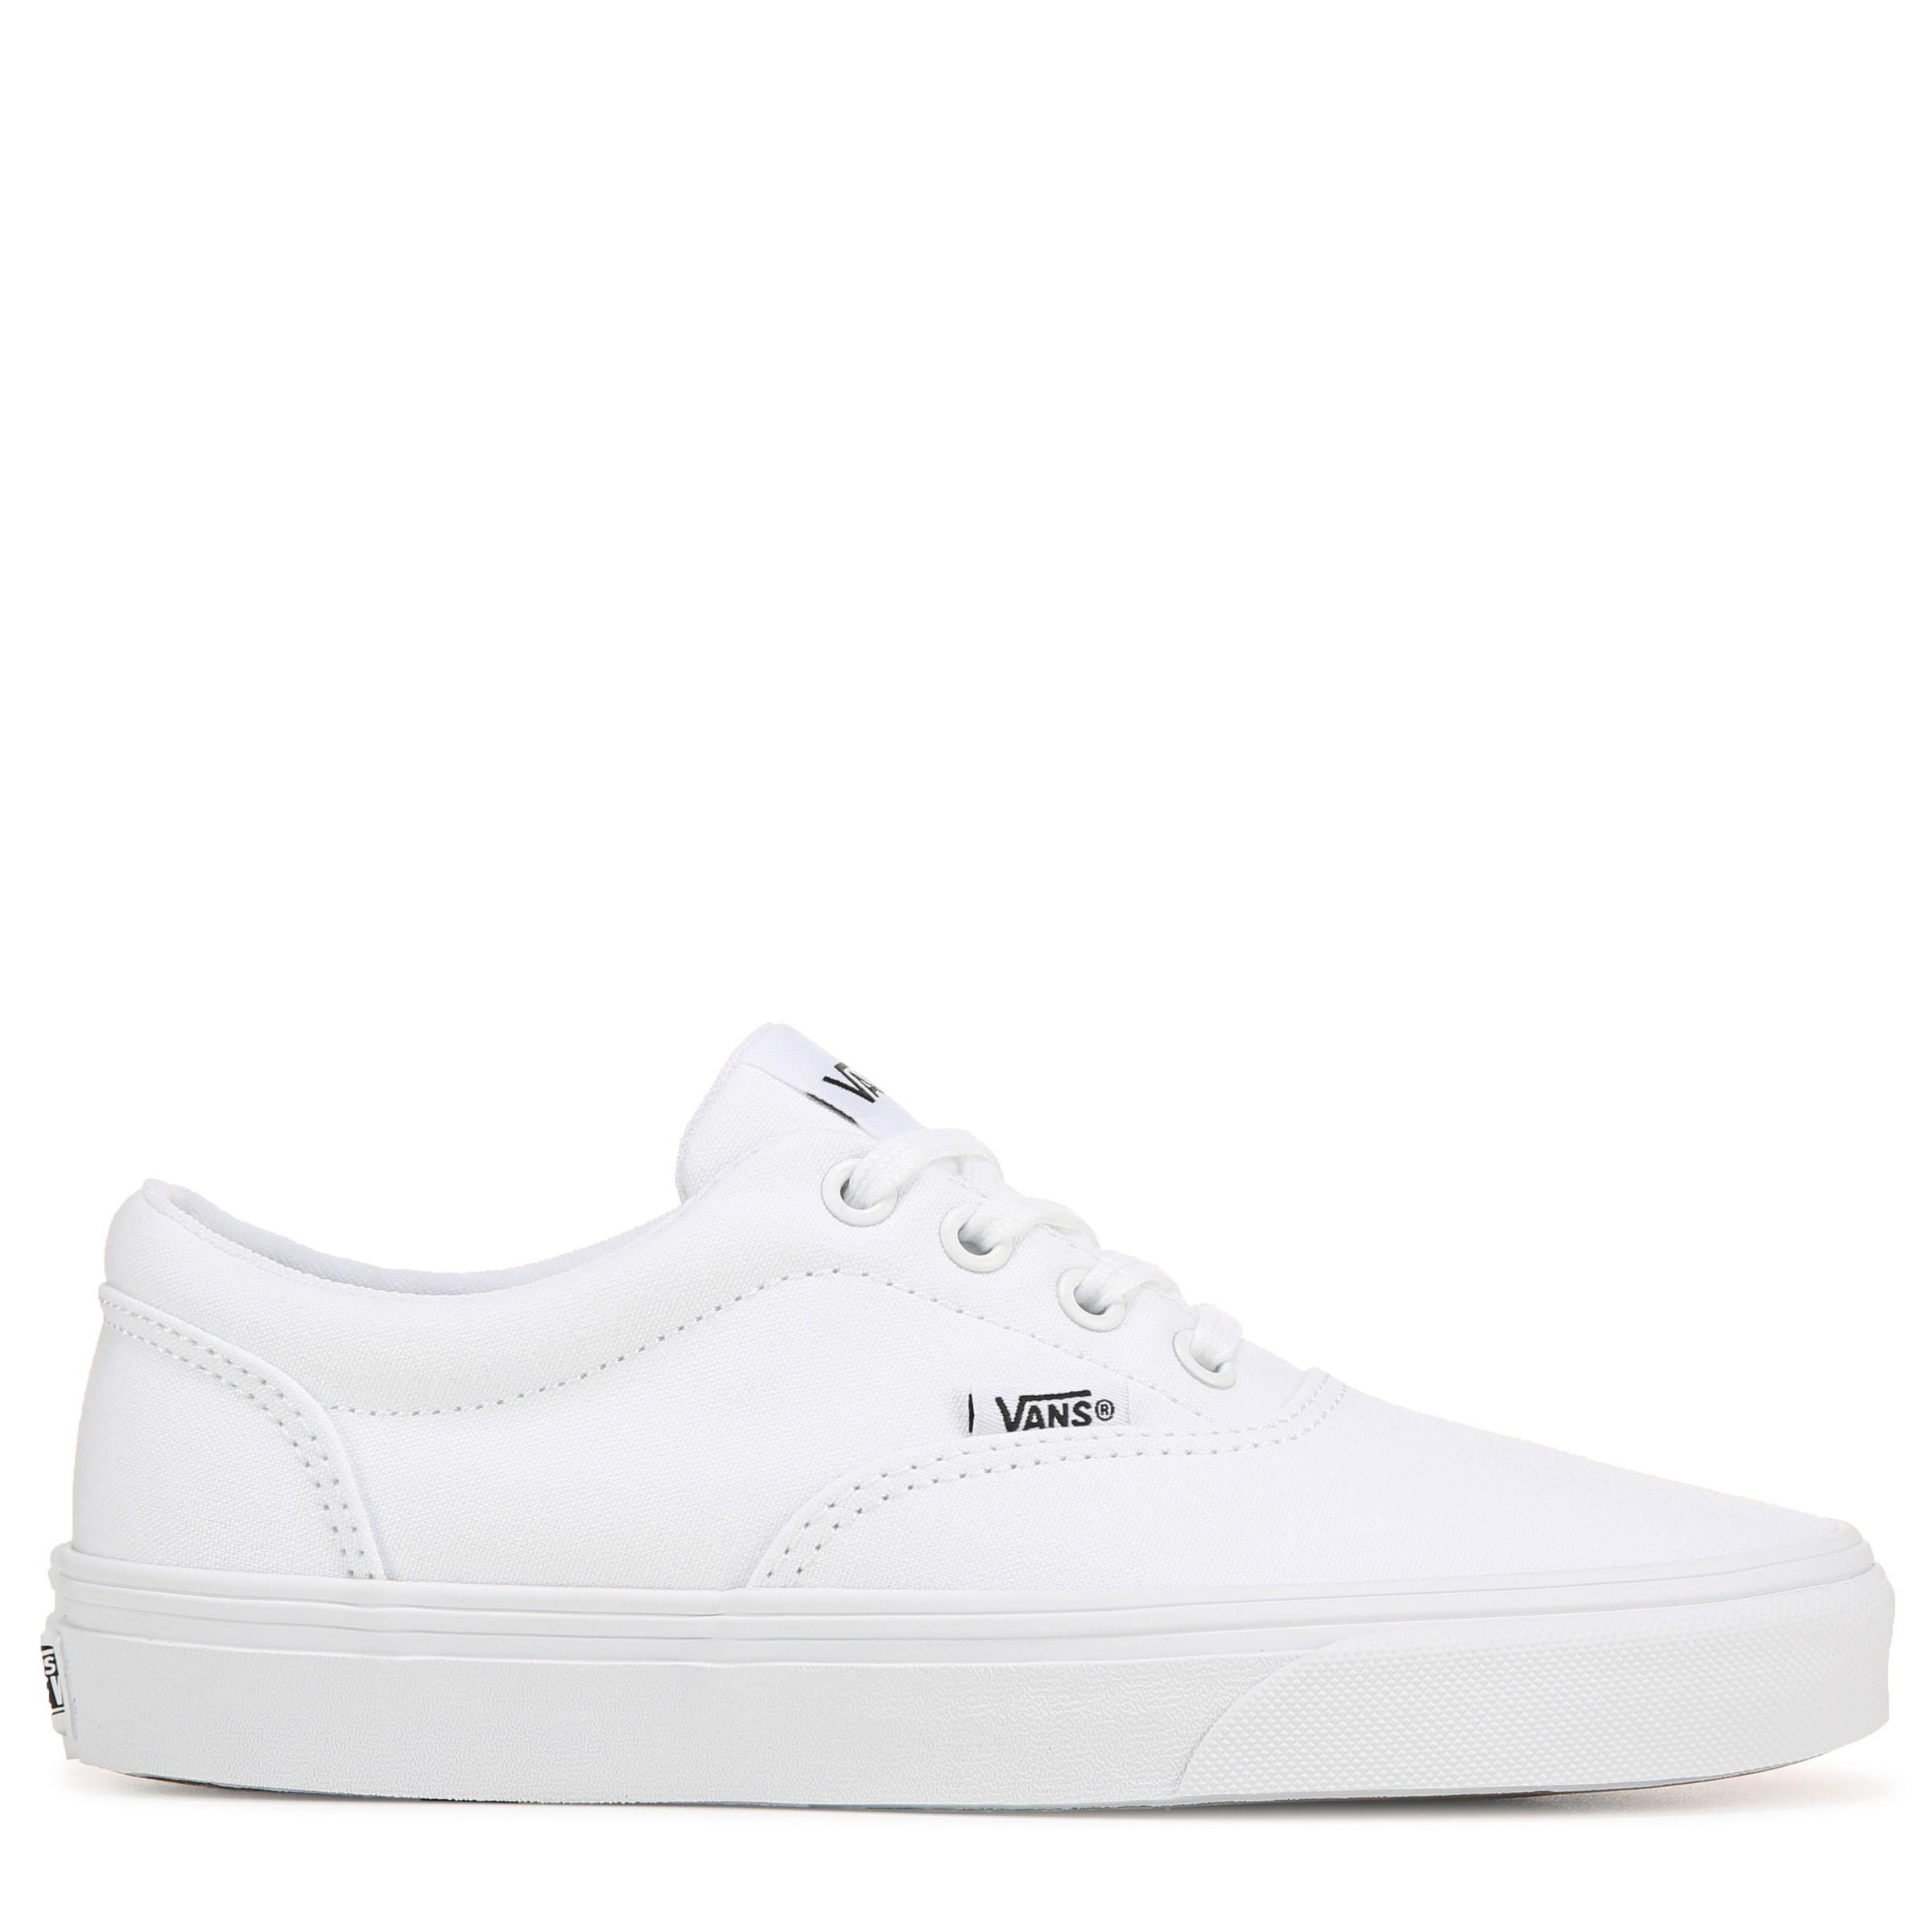 Vans Canvas Doheny Sneakers in White/White (White) - Lyst